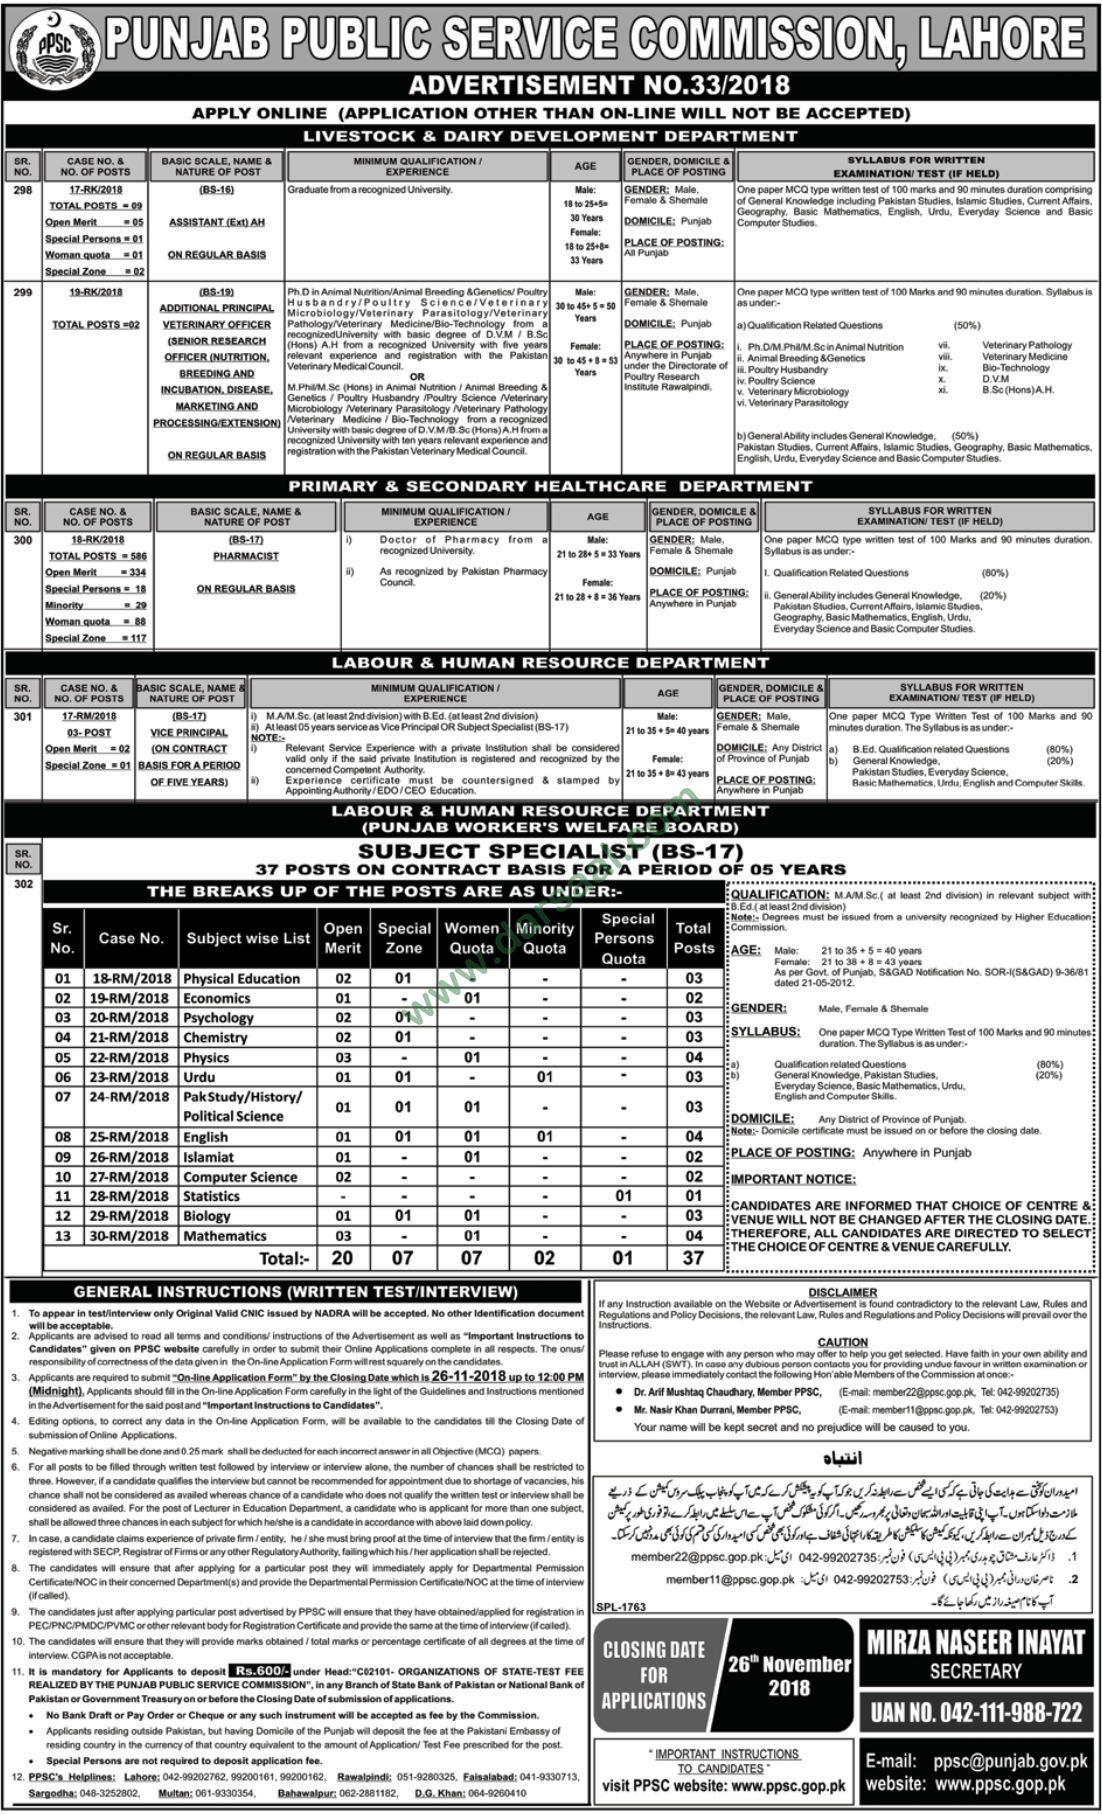 Assistant Jobs in Punjab Public Service Commission - PPSC in Gujranwala - Nov 11, 2018